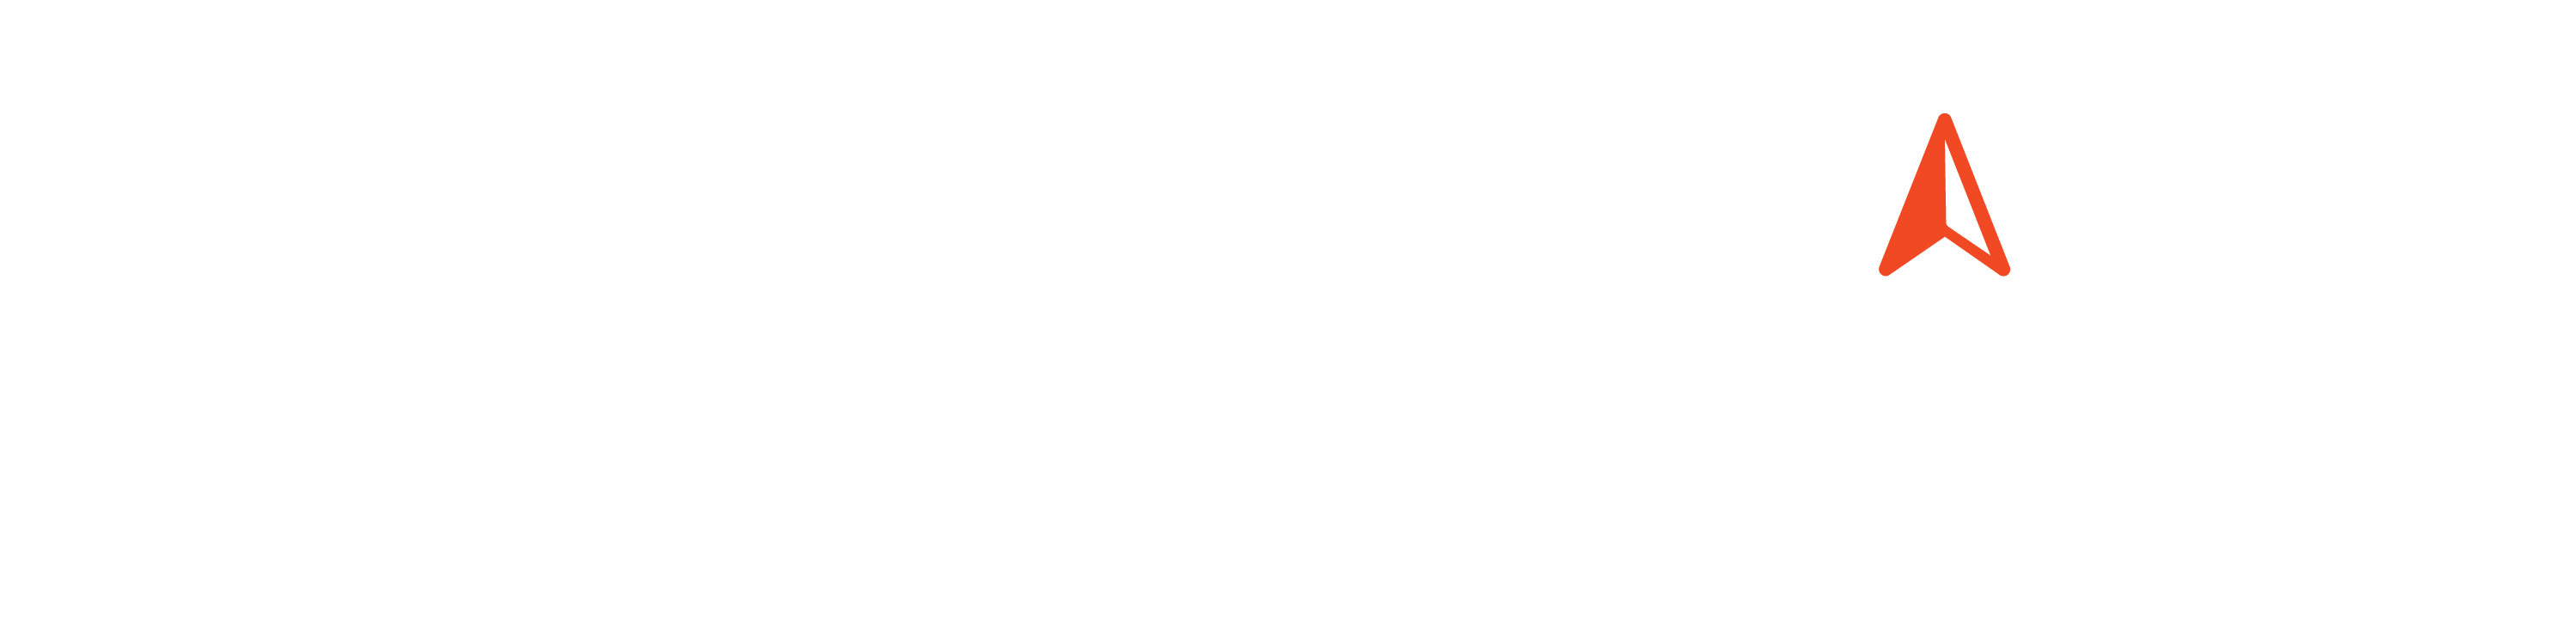 Trail Forward Counseling